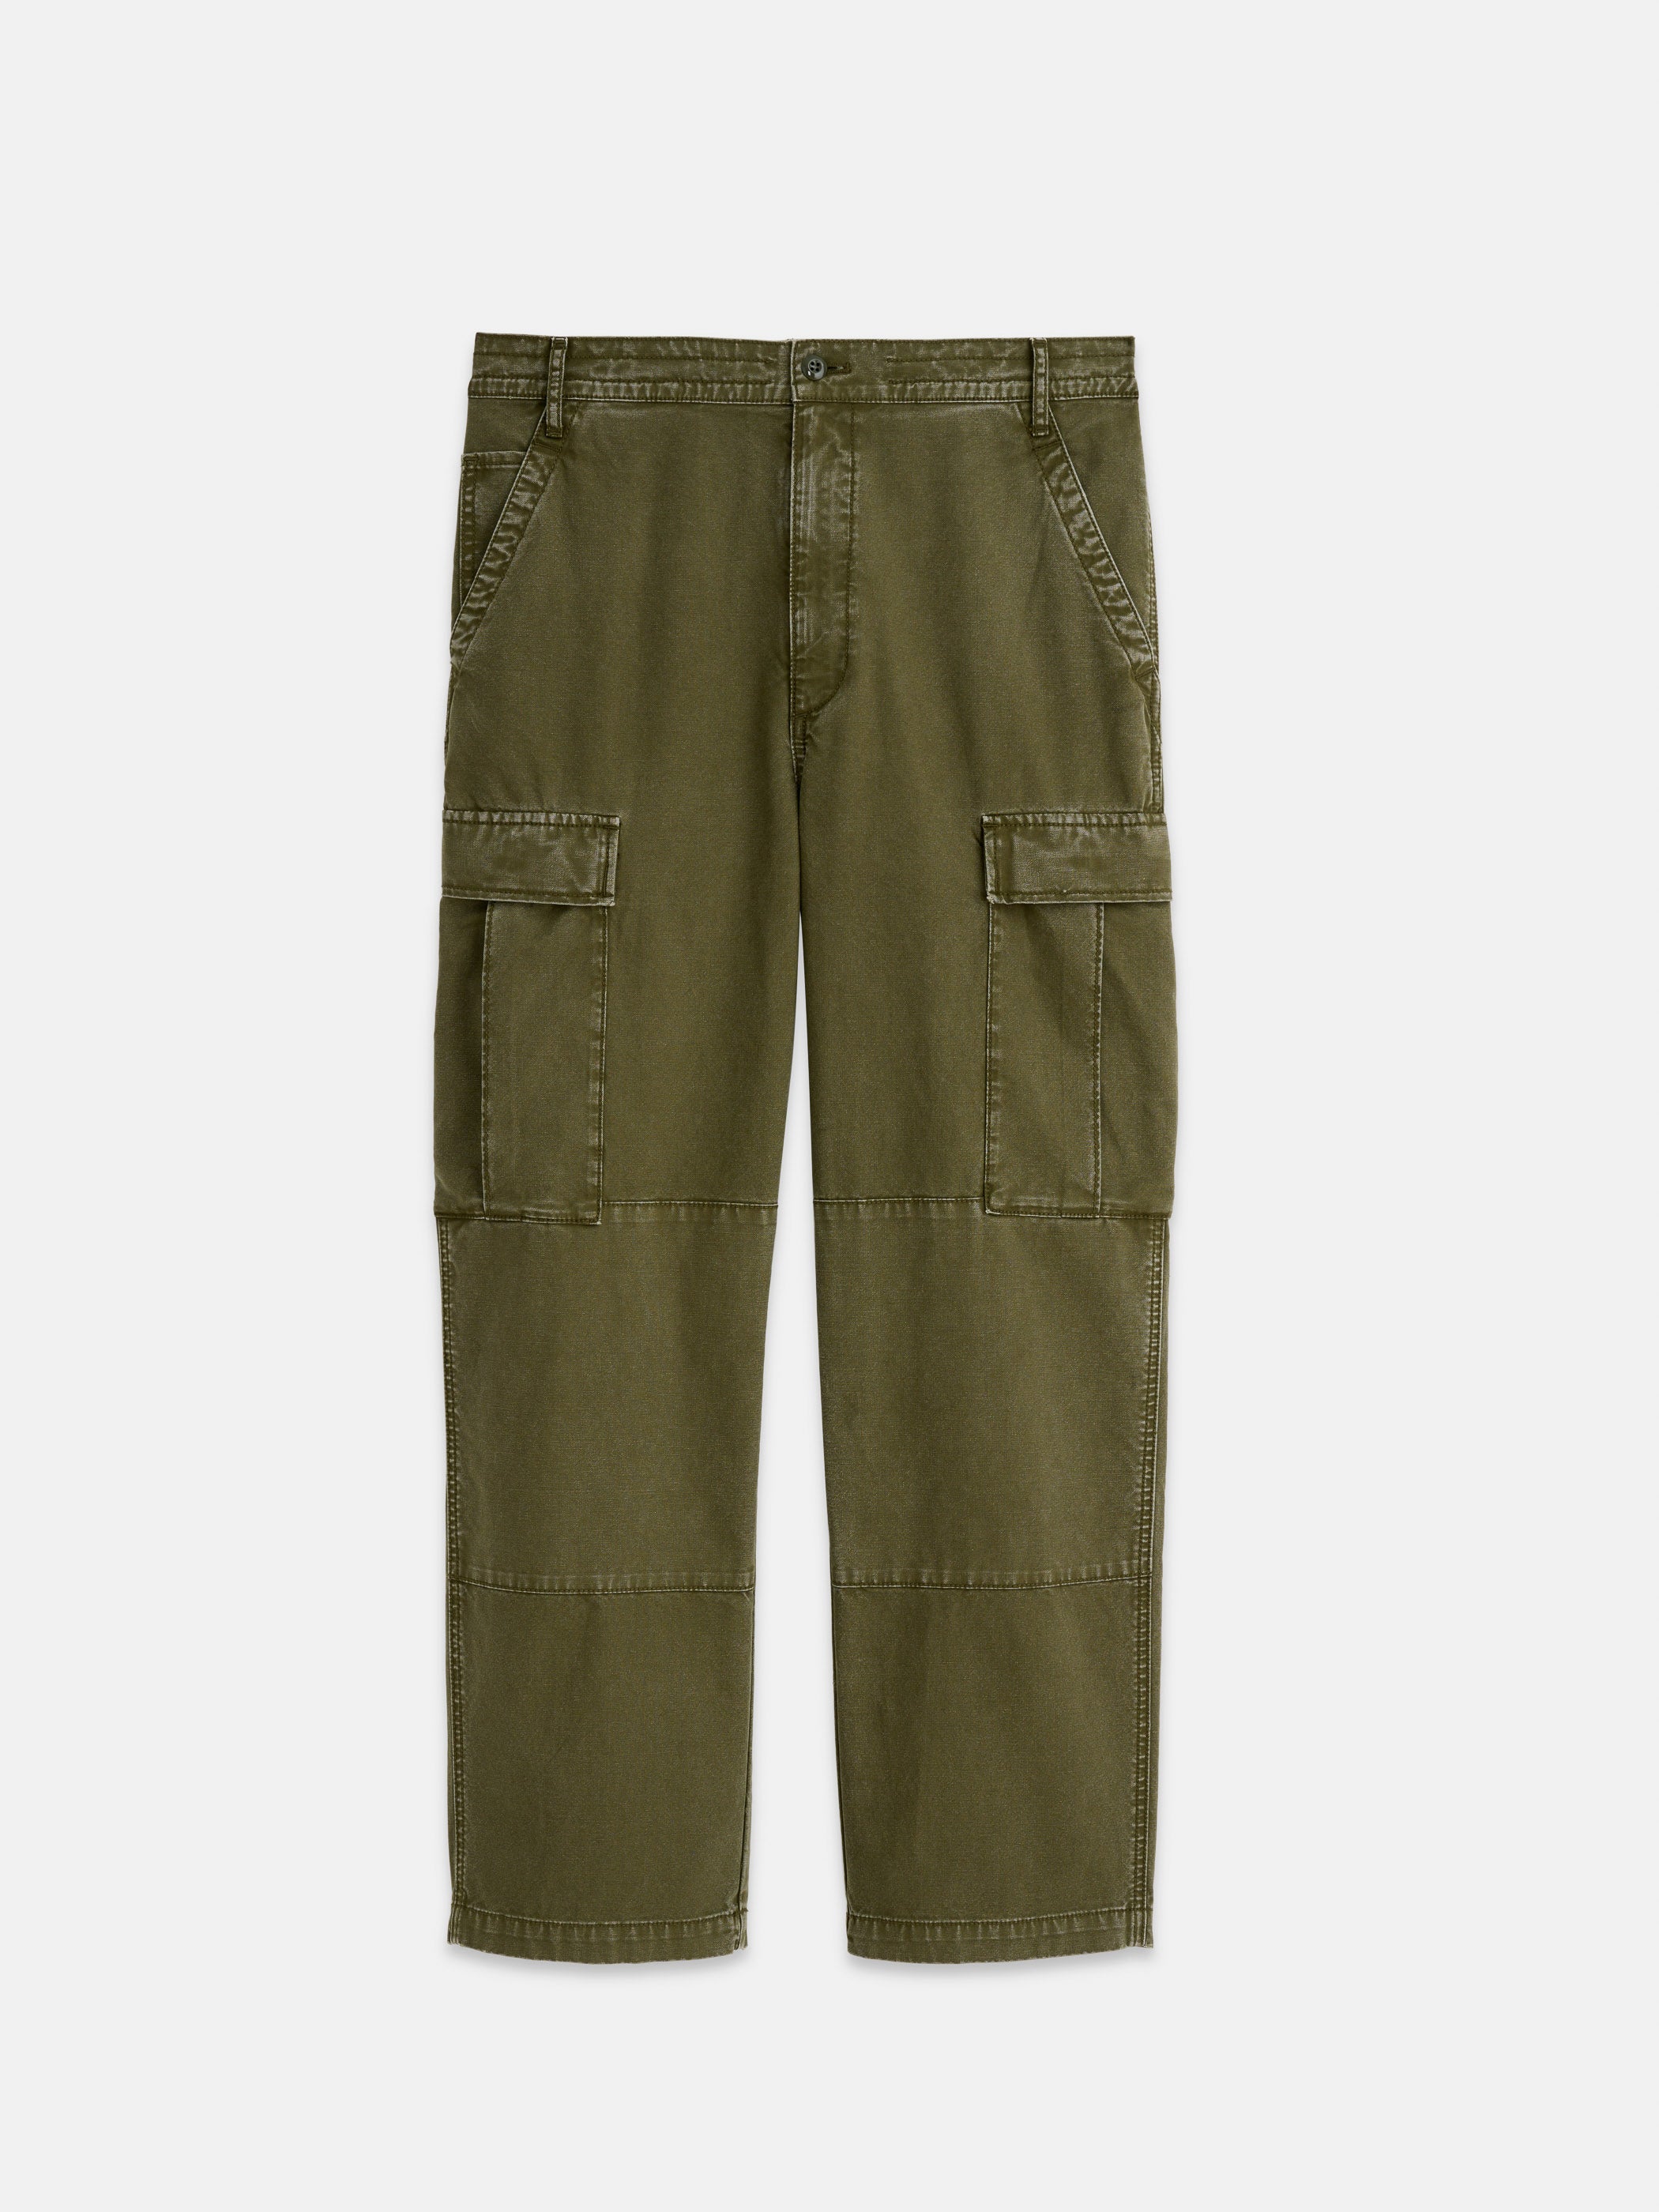 Alex Mill Pull On Cargo Pant In Canvas In Field Olive